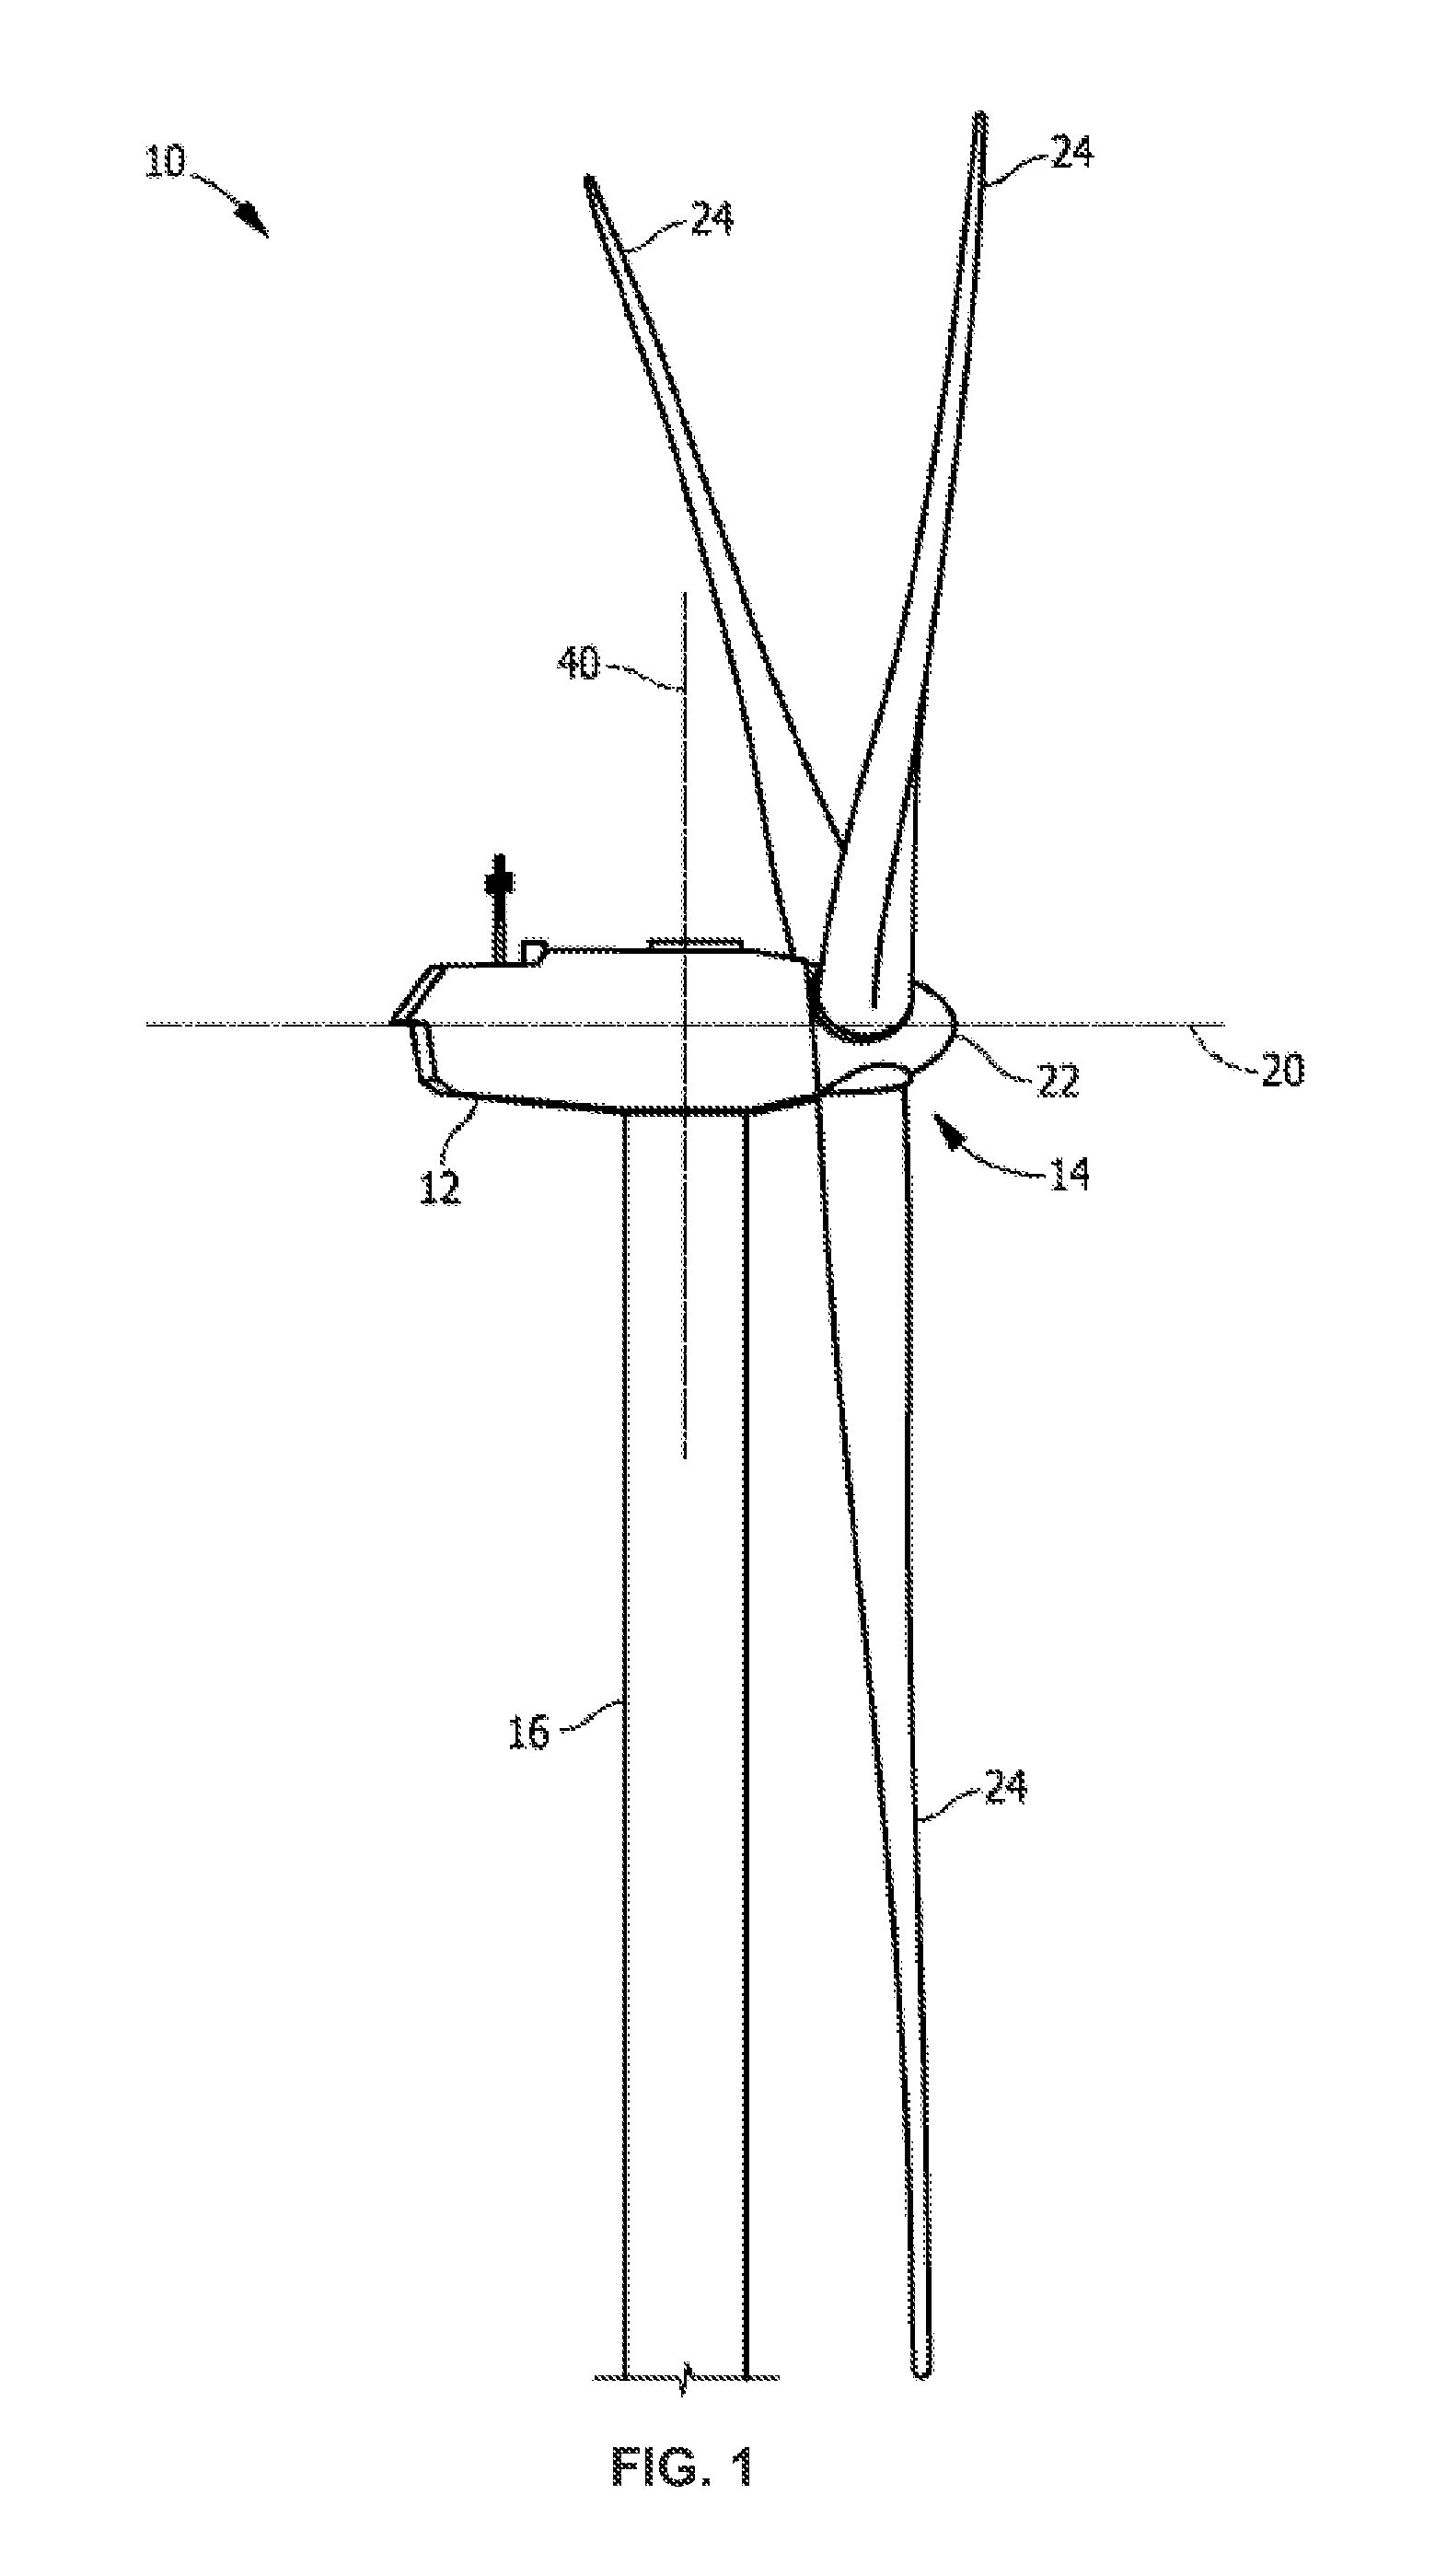 Method and systems for operating a wind turbine using dynamic braking in response to a grid event